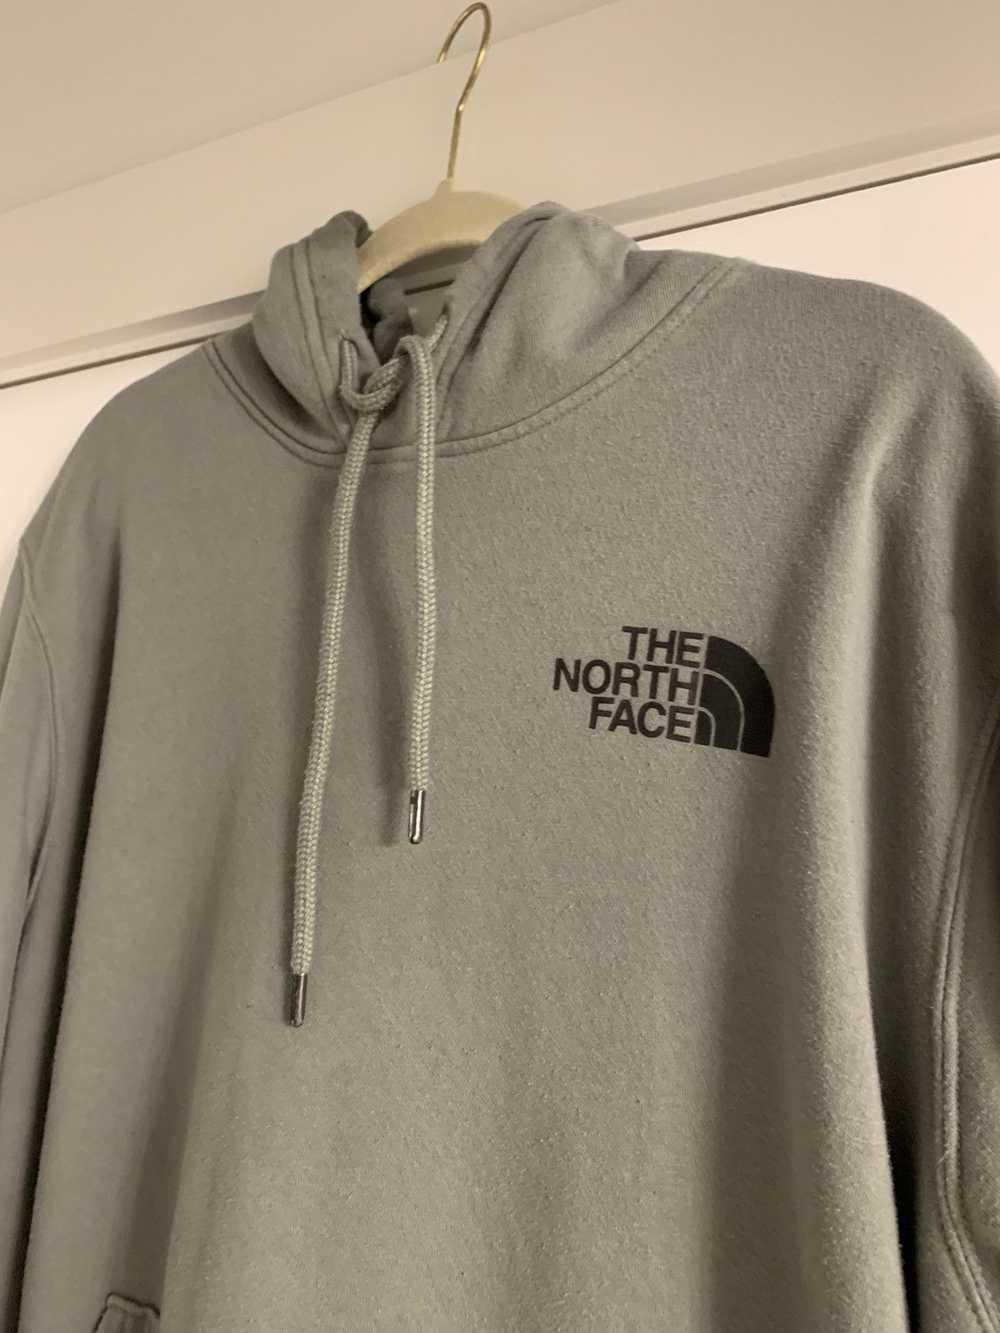 The North Face North Face Sweatshirt - image 2